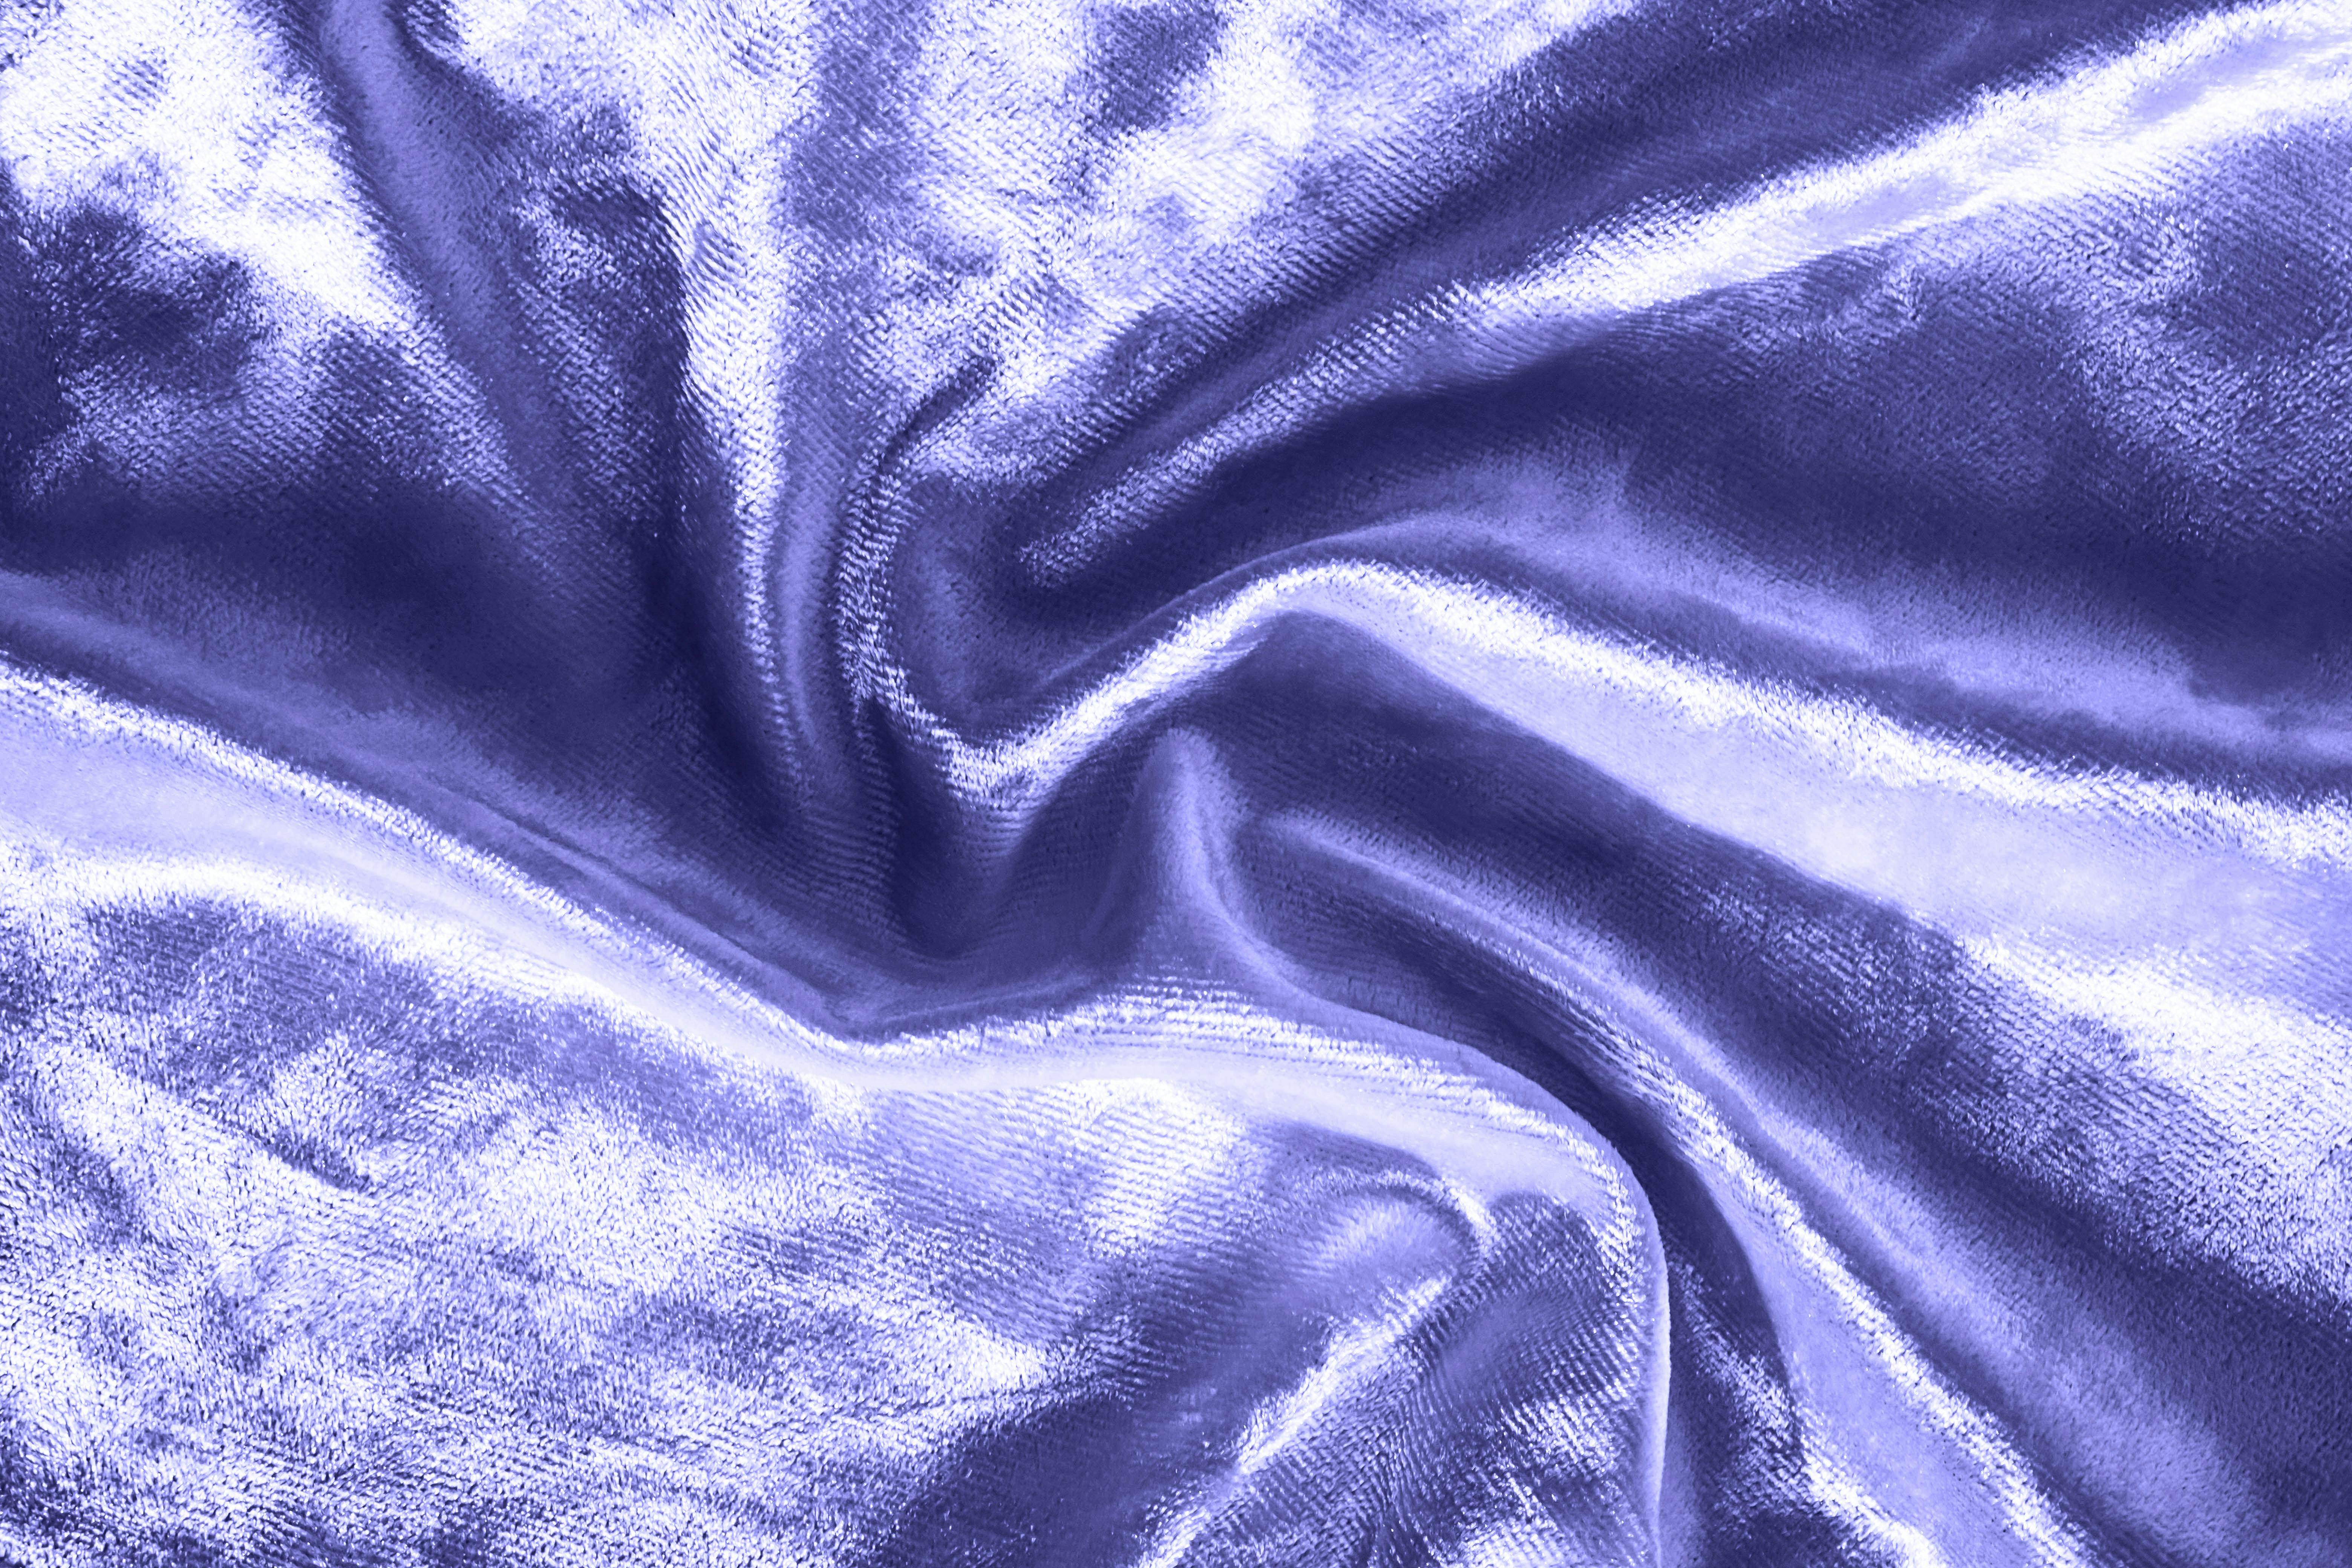 close up of purple velvet fabric swirled in a pattern